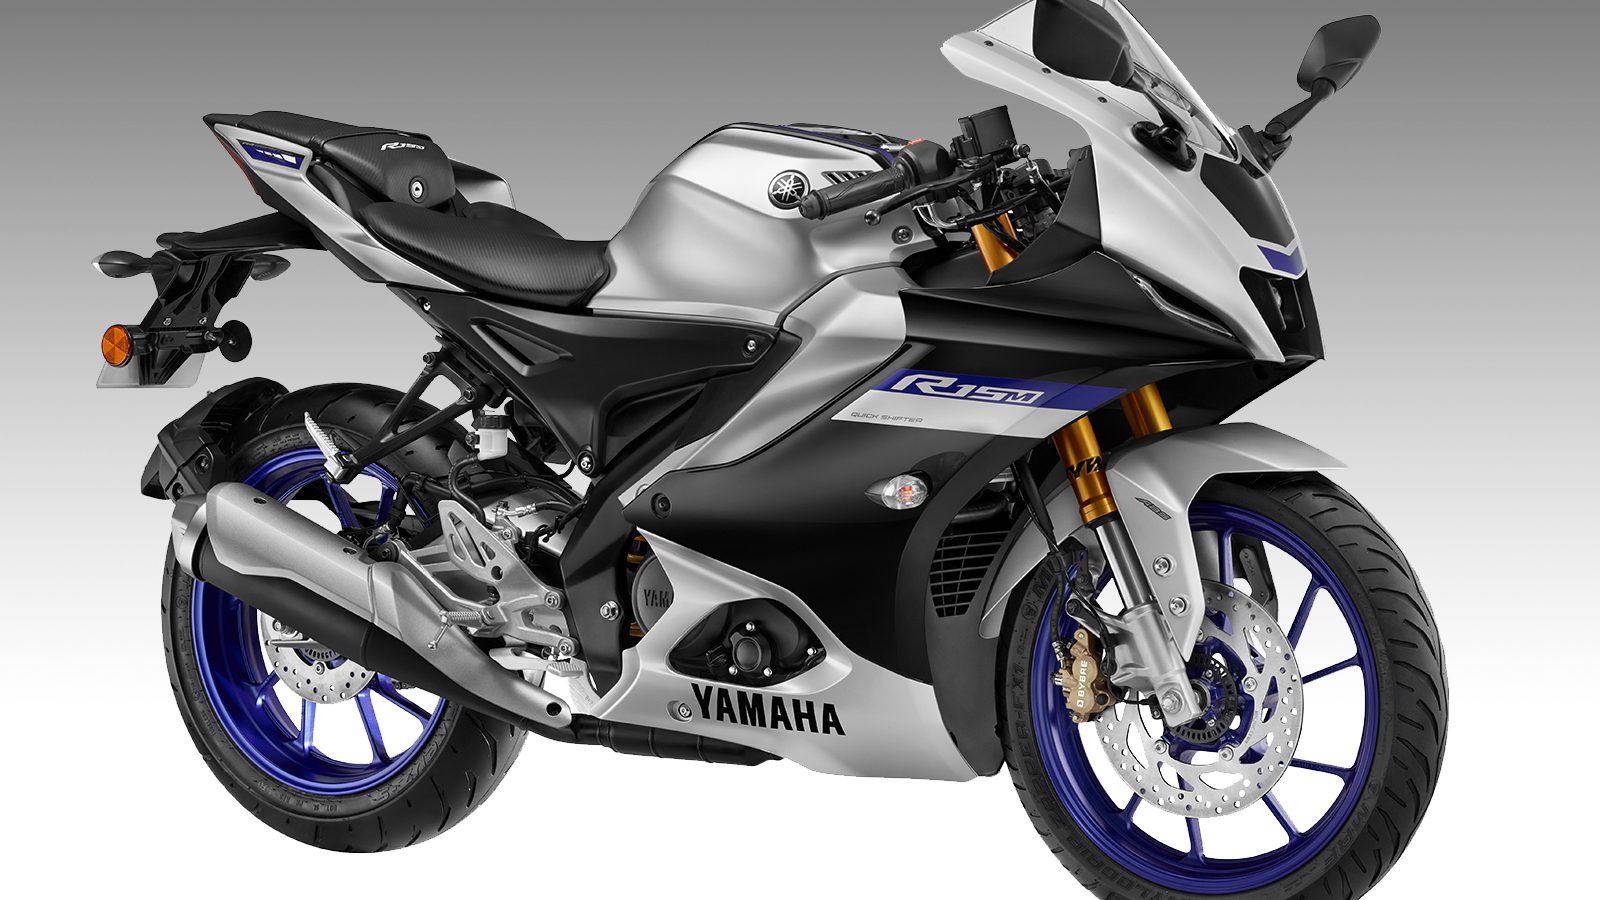 Yamaha YZF R15 V4 Launched In India At Rs 1.68 Lakh, Gets New And Sportier M Variant